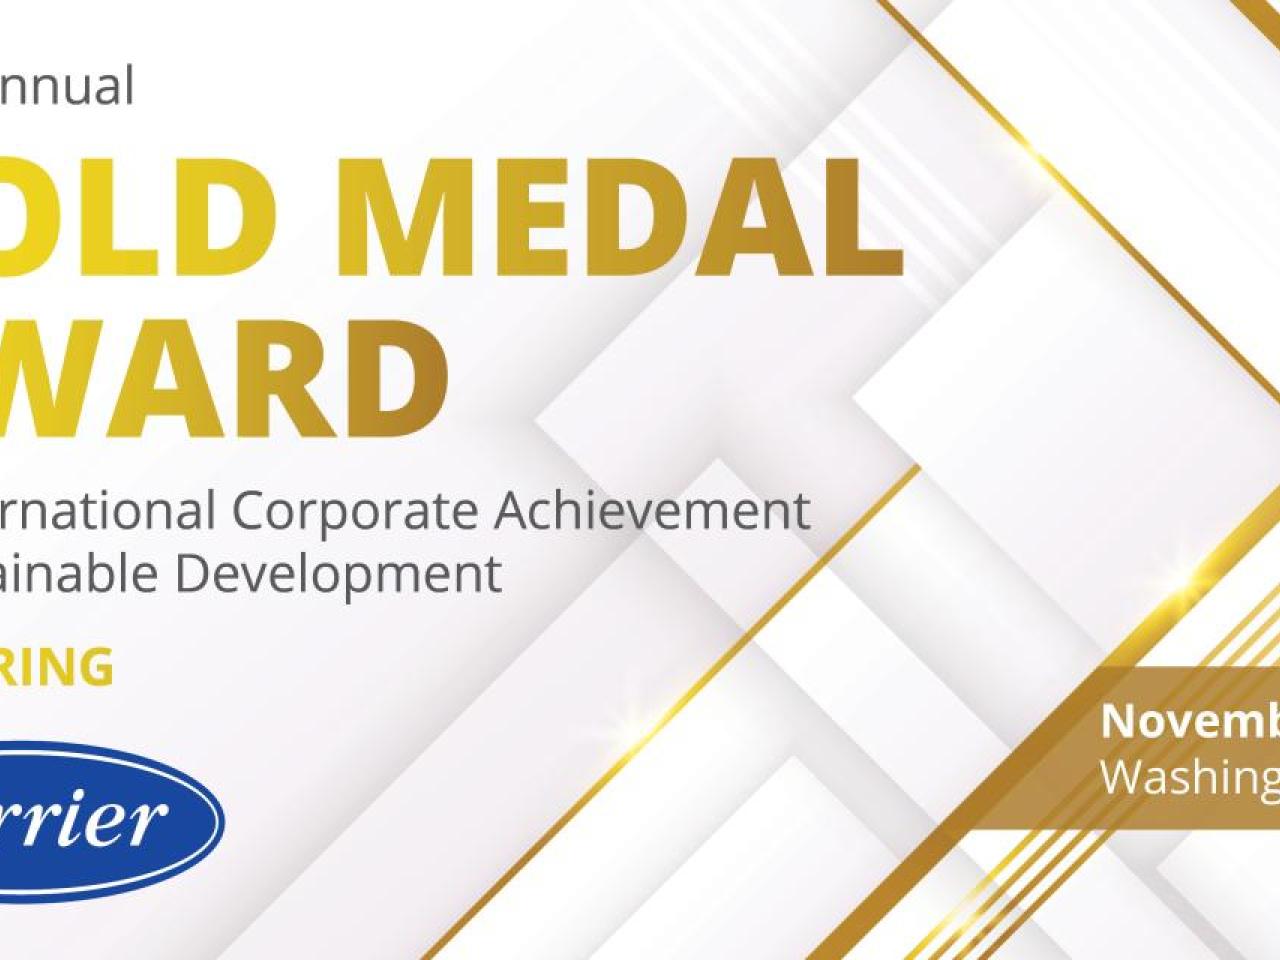 "40th Annual GOLD MEDAL AWARD for International Corporate Achievement in Sustainable Development"